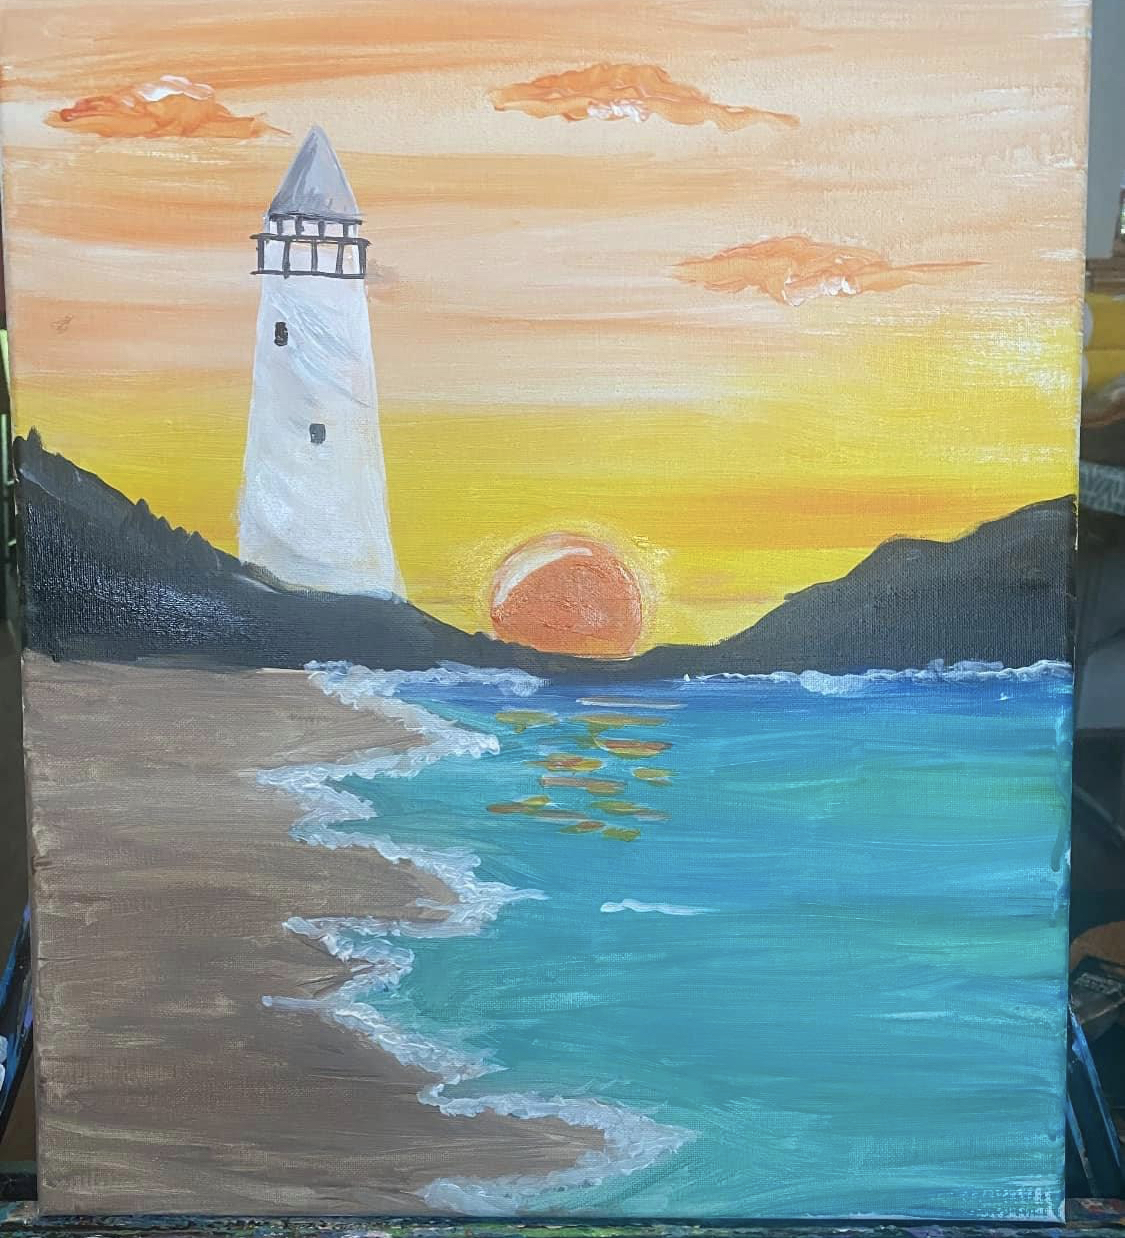 Painting of a beach at sunset with a lighthouse in the background.